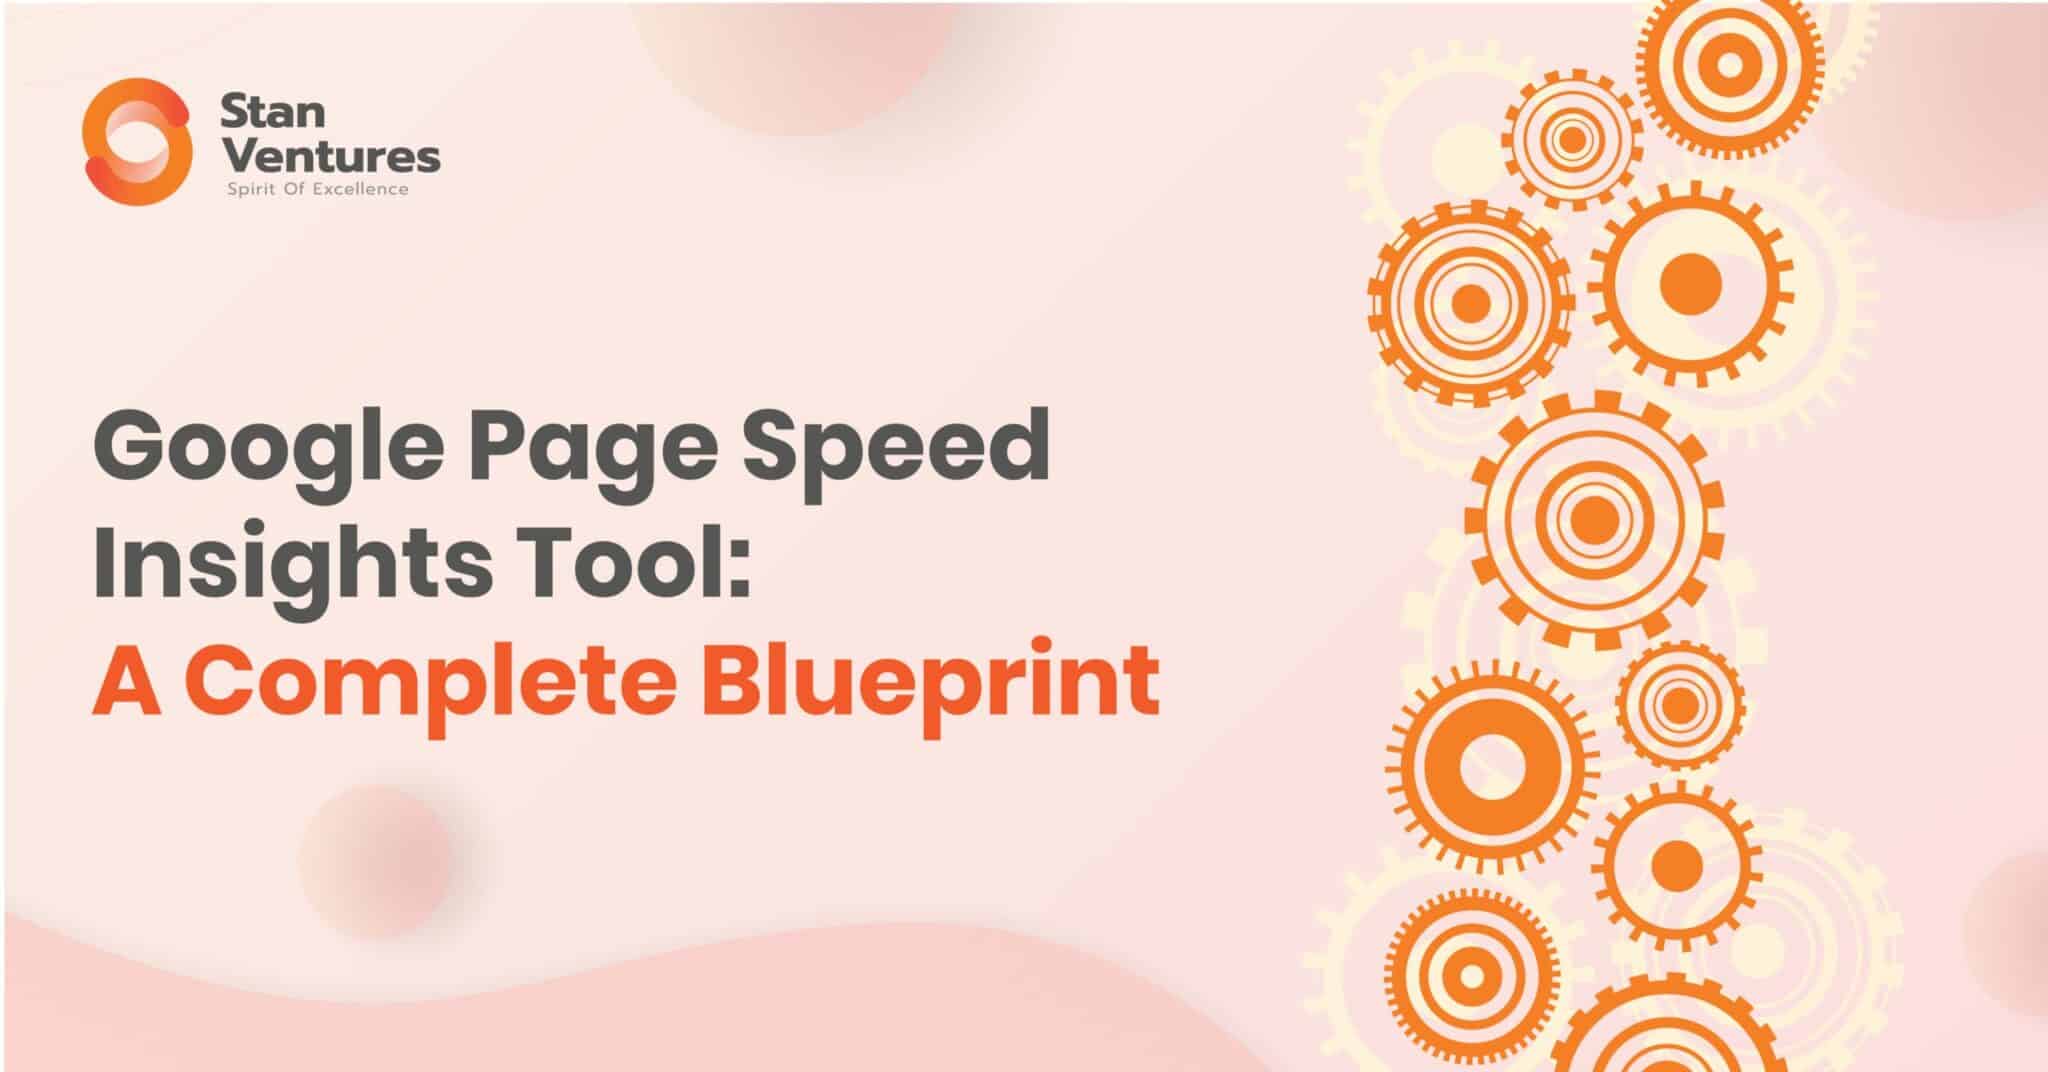 Google PageSpeed Insights Tool: Featured image